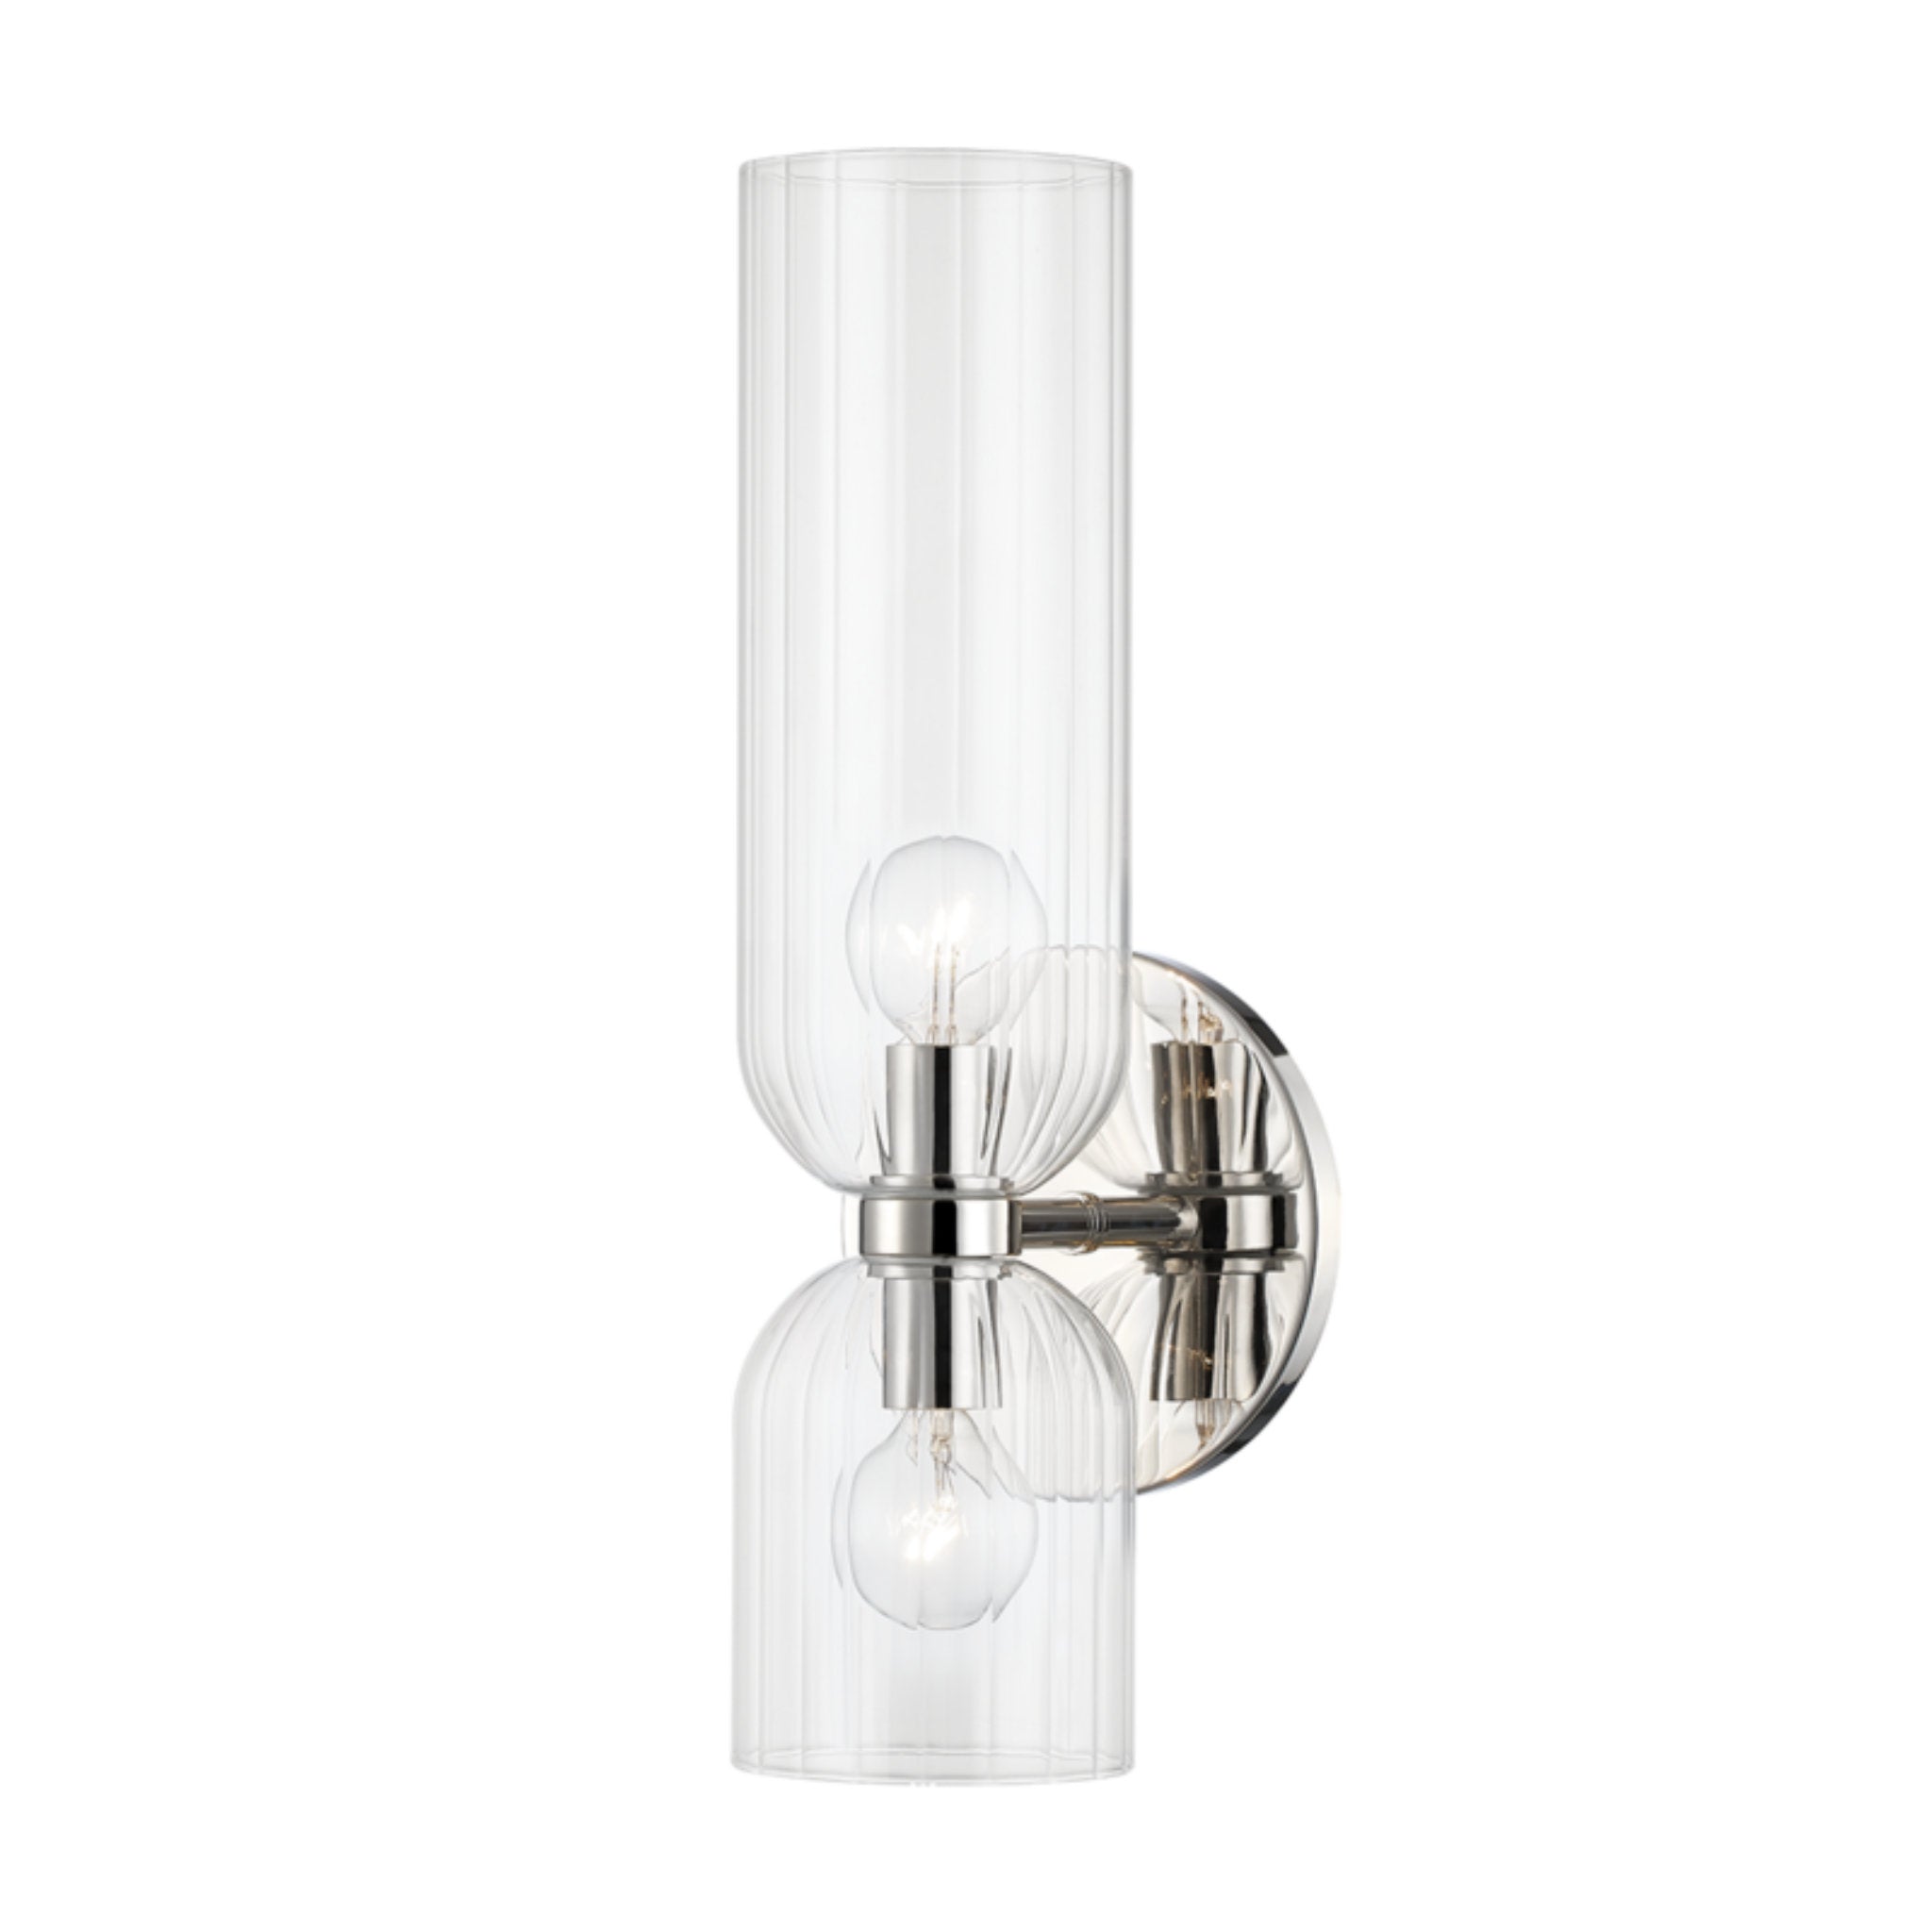 Sayville 2 Light Wall Sconce in Polished Nickel